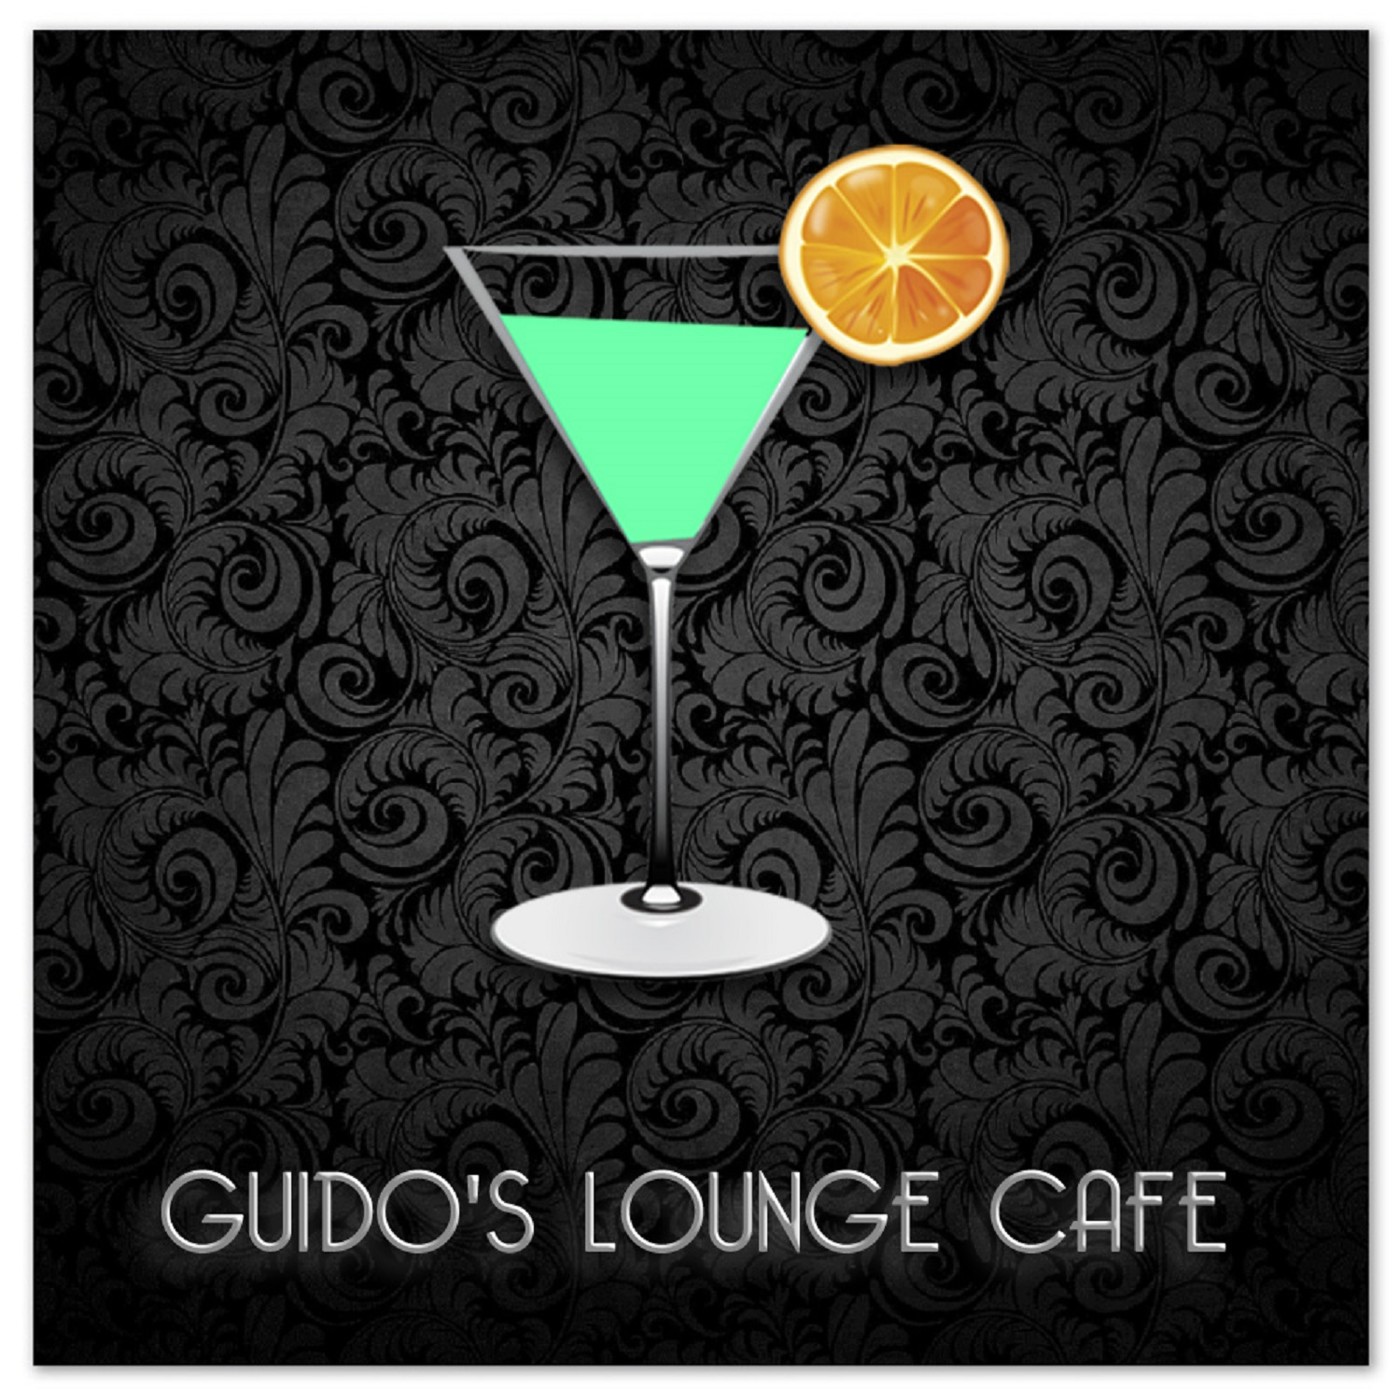 Guido's Lounge Cafe